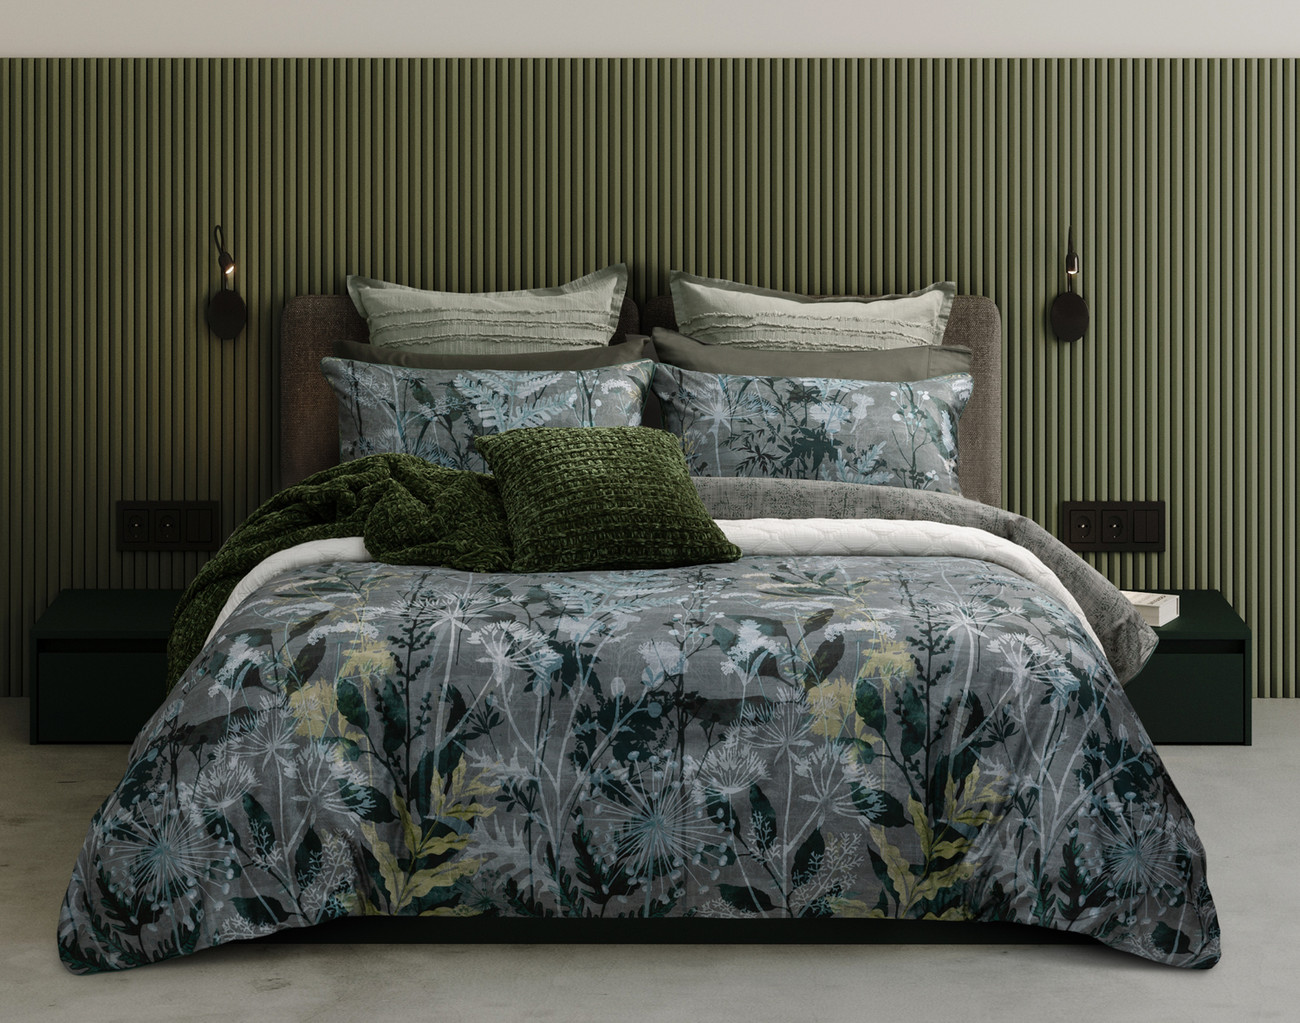 Green, White and Grey Floral Duvet Cover Set